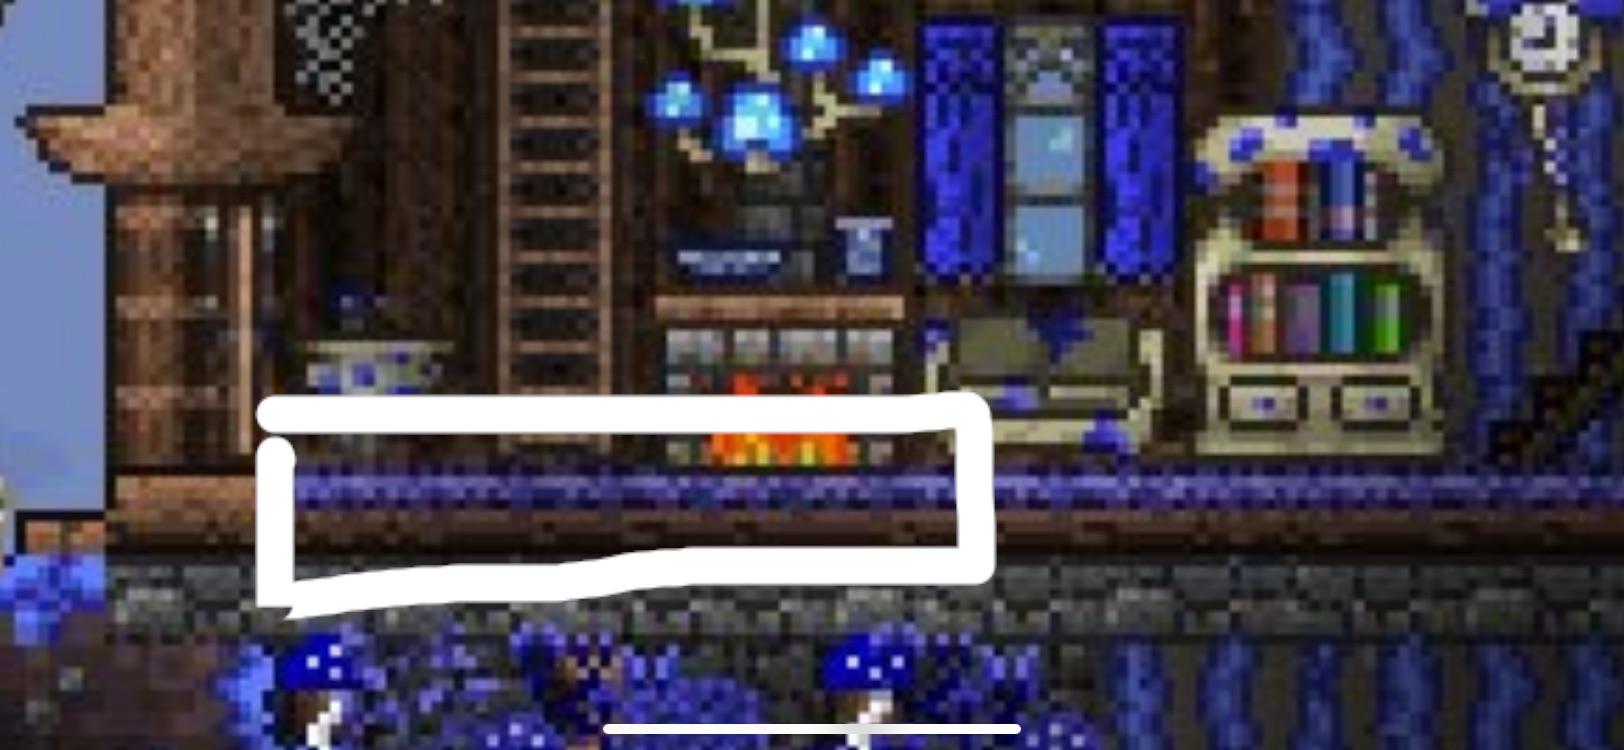 Ligner Evaluering gør ikke r/Terraria on Twitter: "What is this wood block with blue?? It would be  amazing flooring! https://t.co/nnegb0nUvY https://t.co/fI6Whvrle3" / Twitter